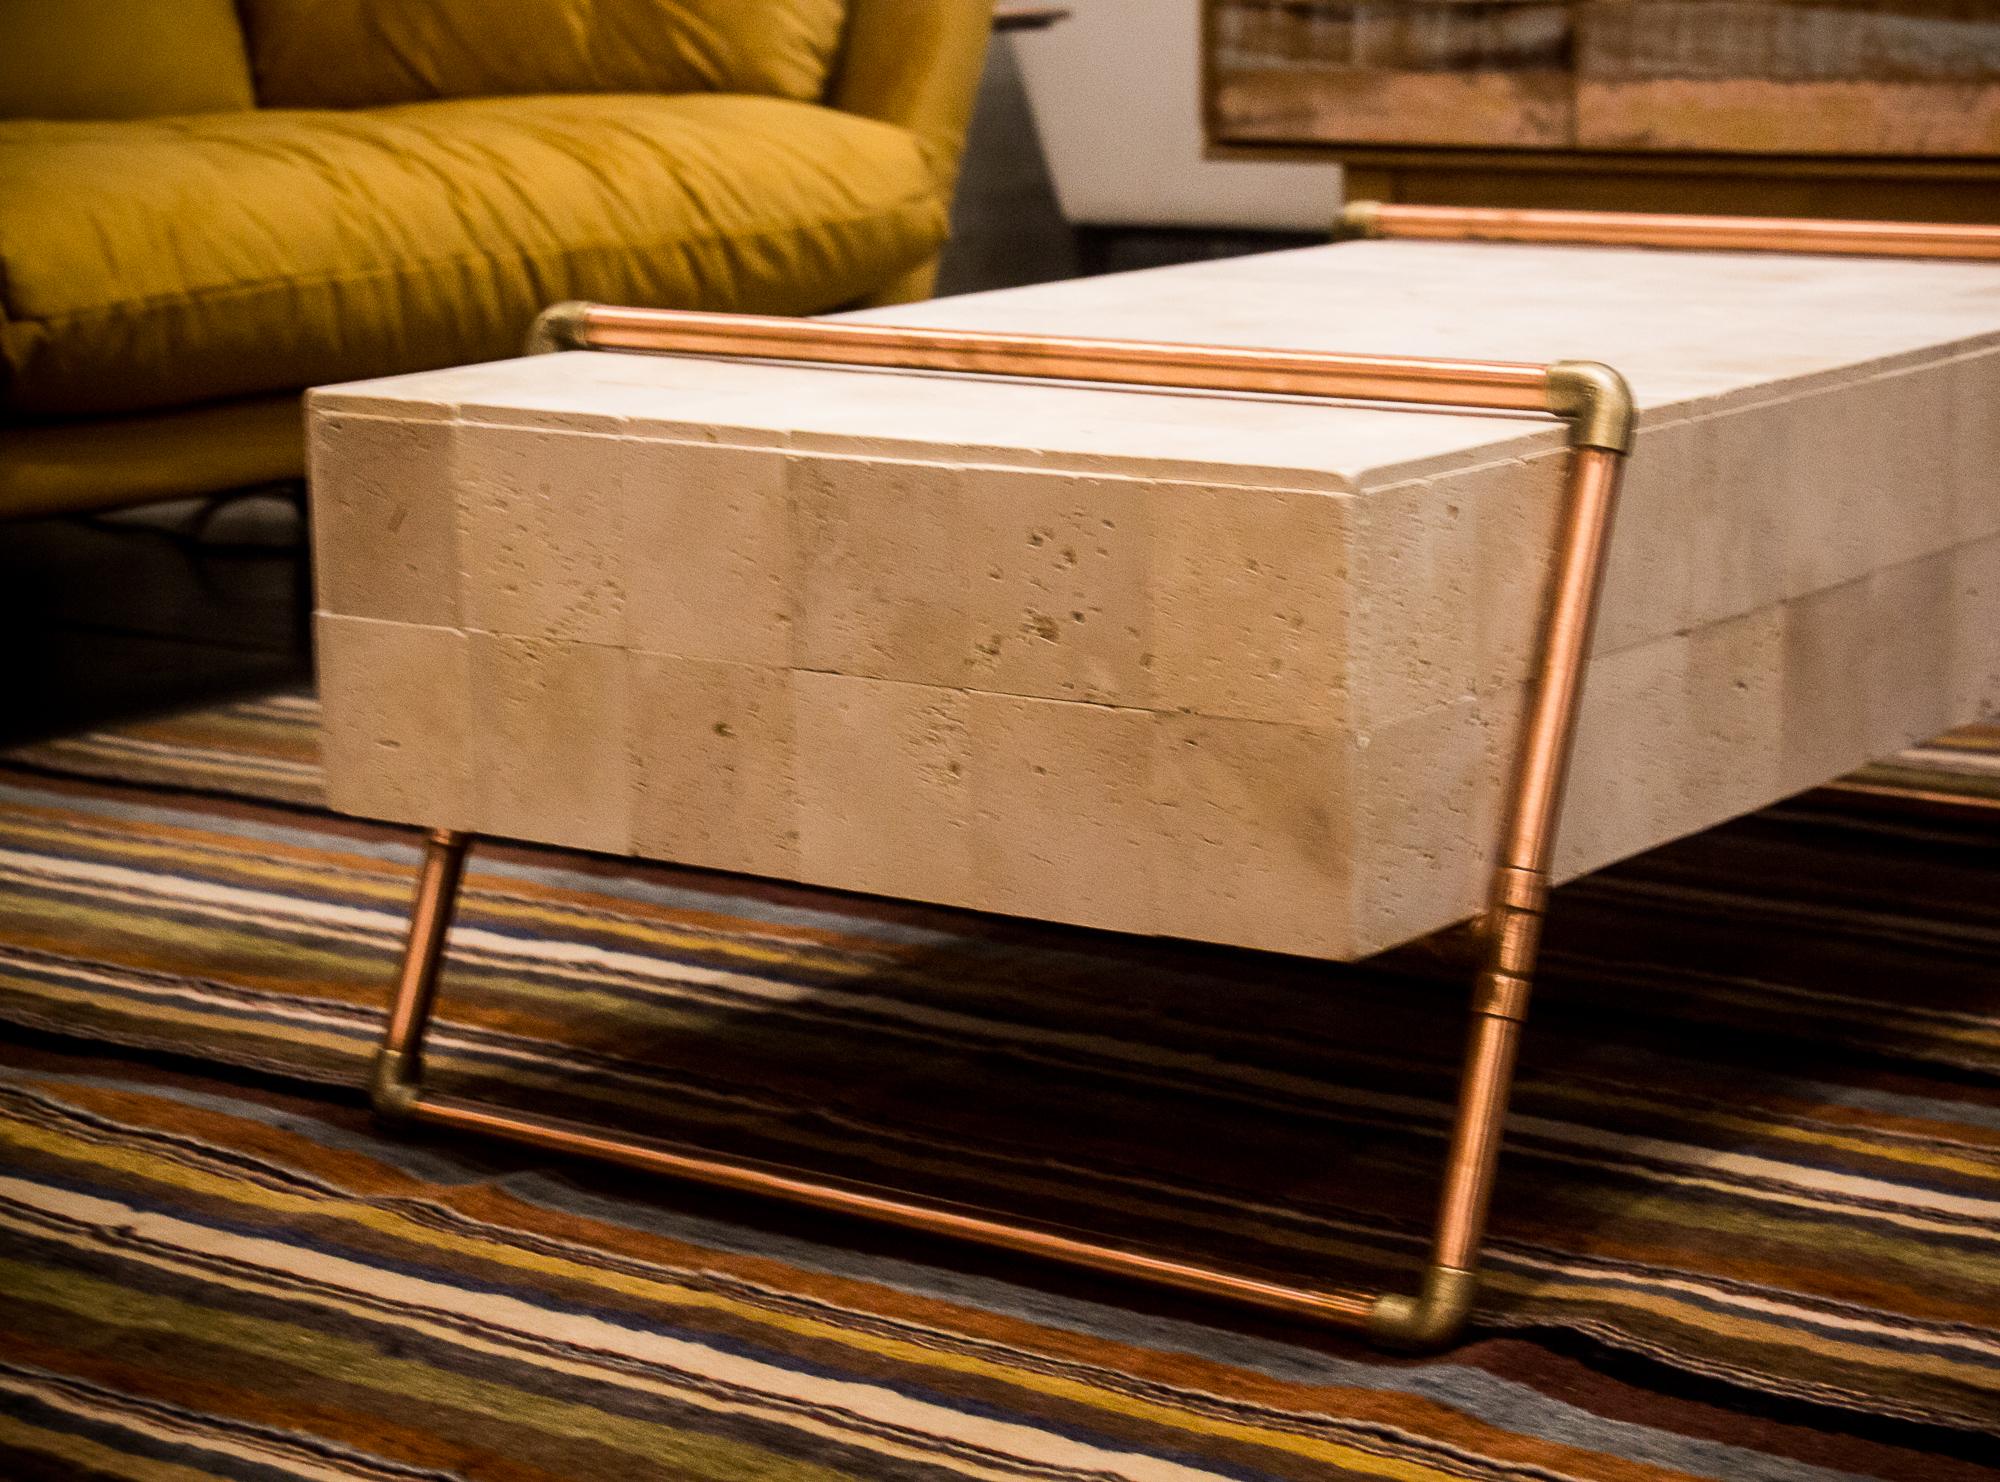 Made of copper, travertine Mable and wood, the Monolito vcenter table has a Minimalist design.